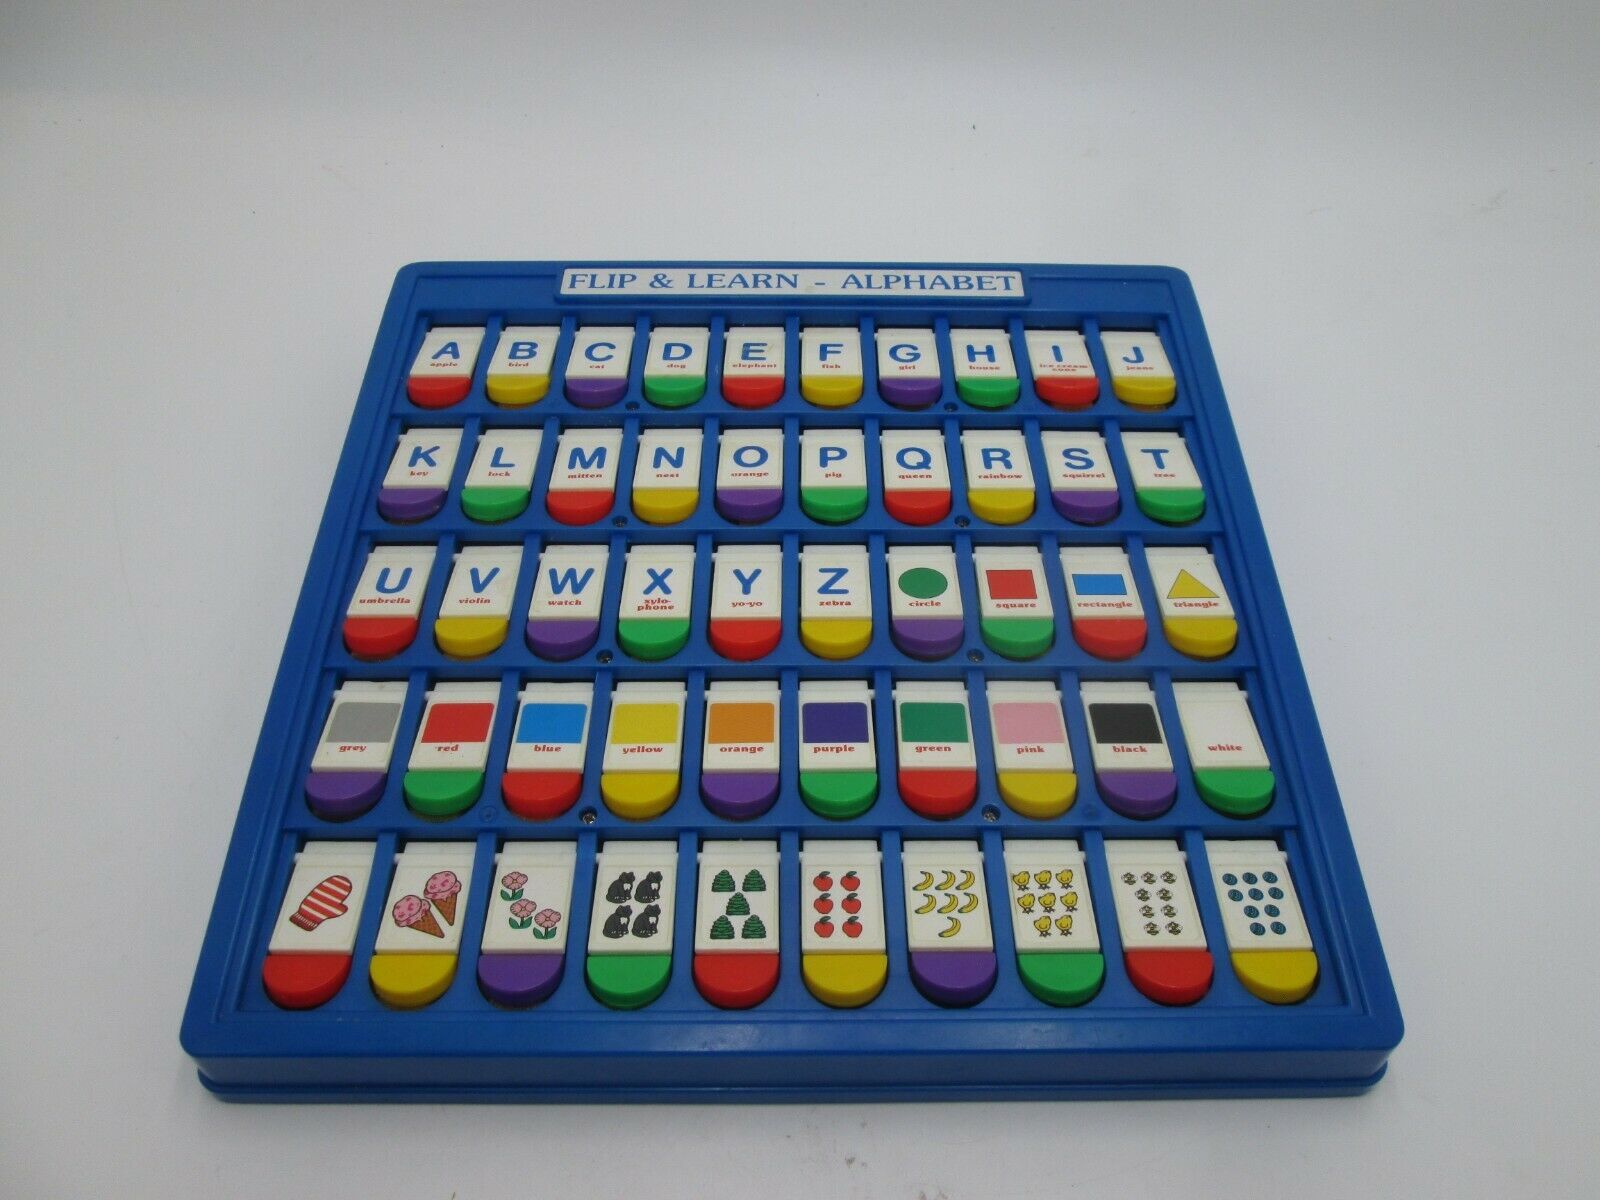 Vintage Playtime Flip Up Learning Center Toy For Abc's Colors, Shape And Numbers